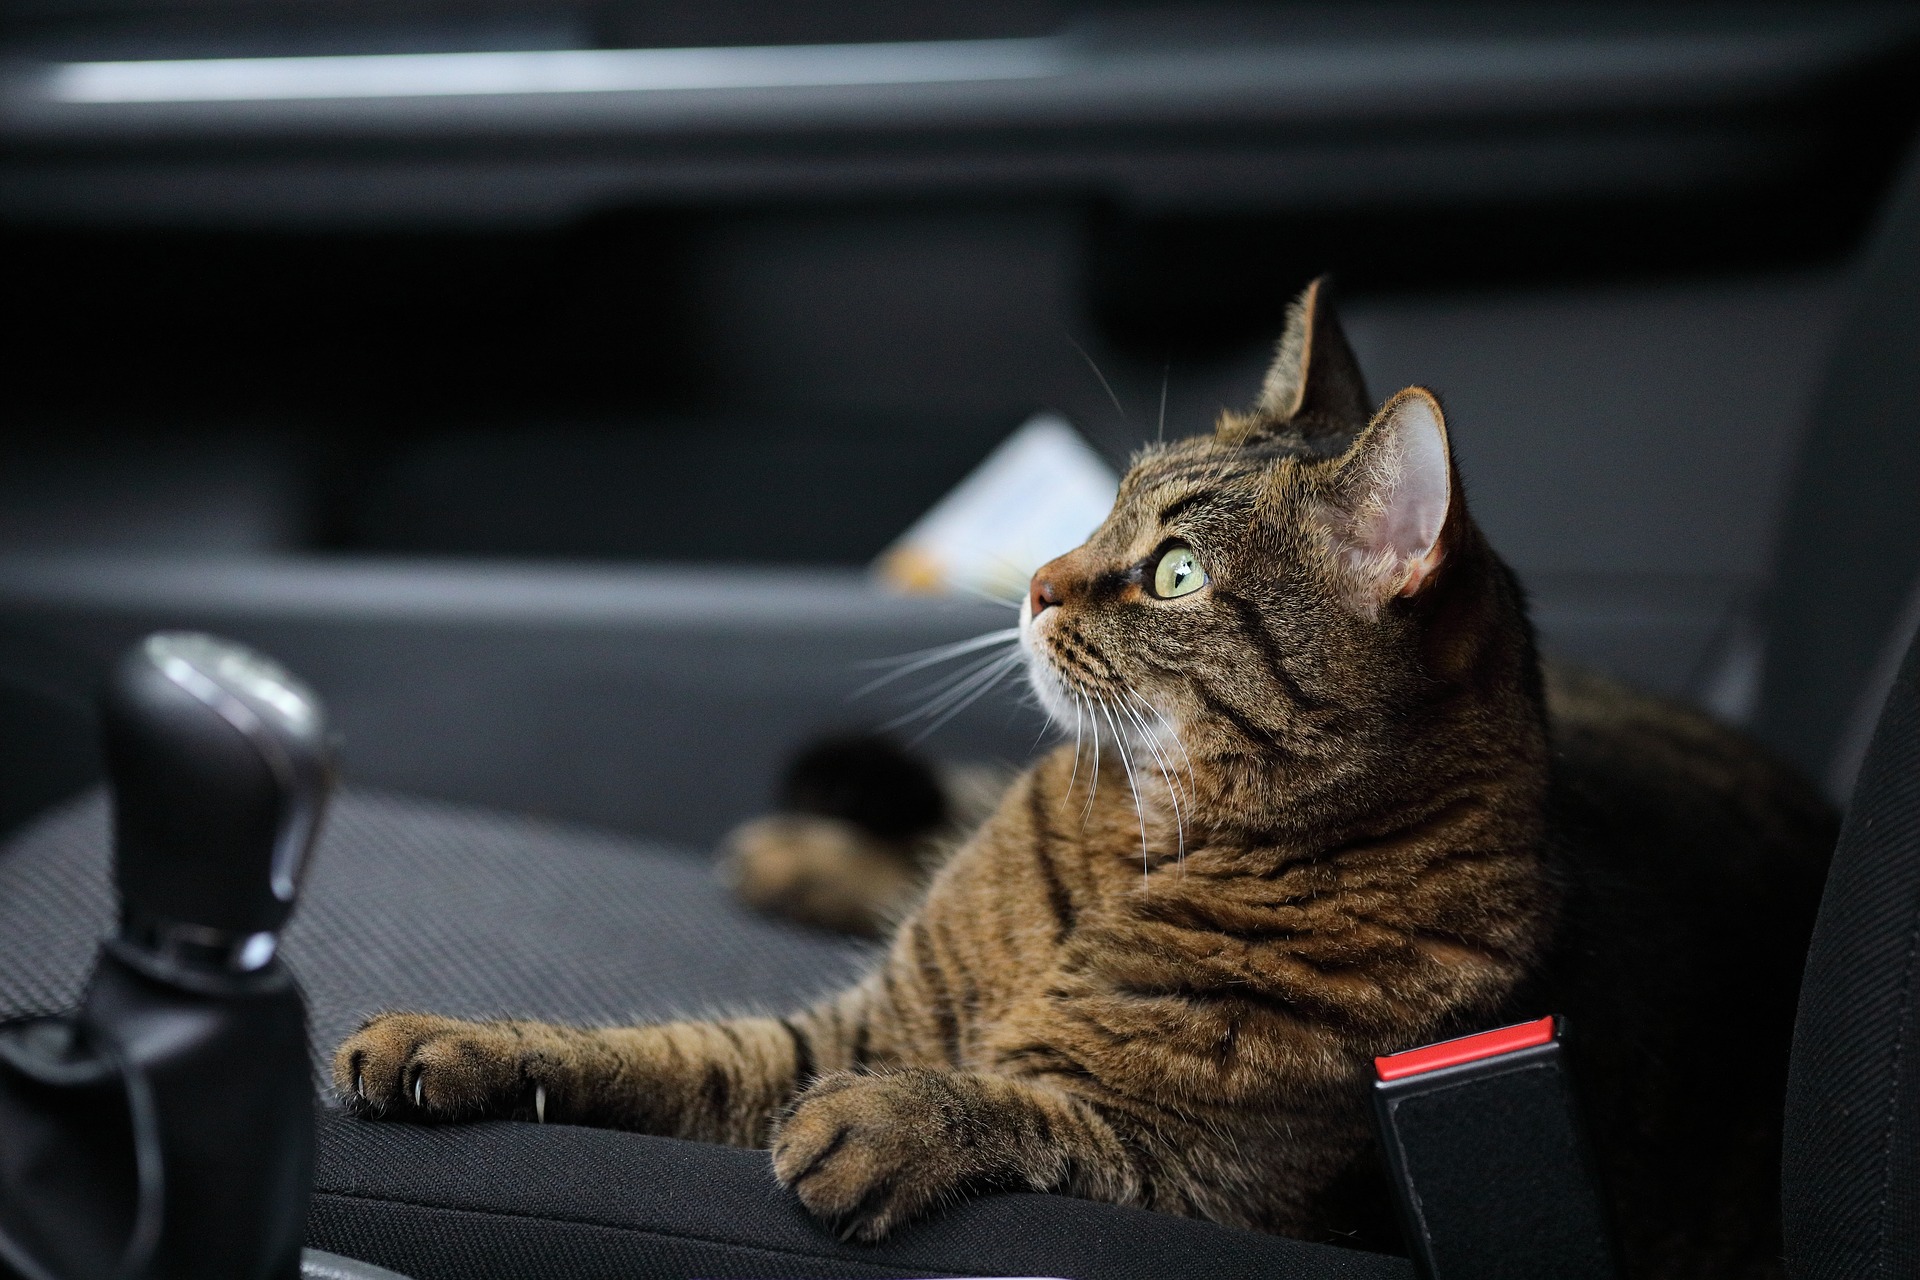 travel with a kitten by car